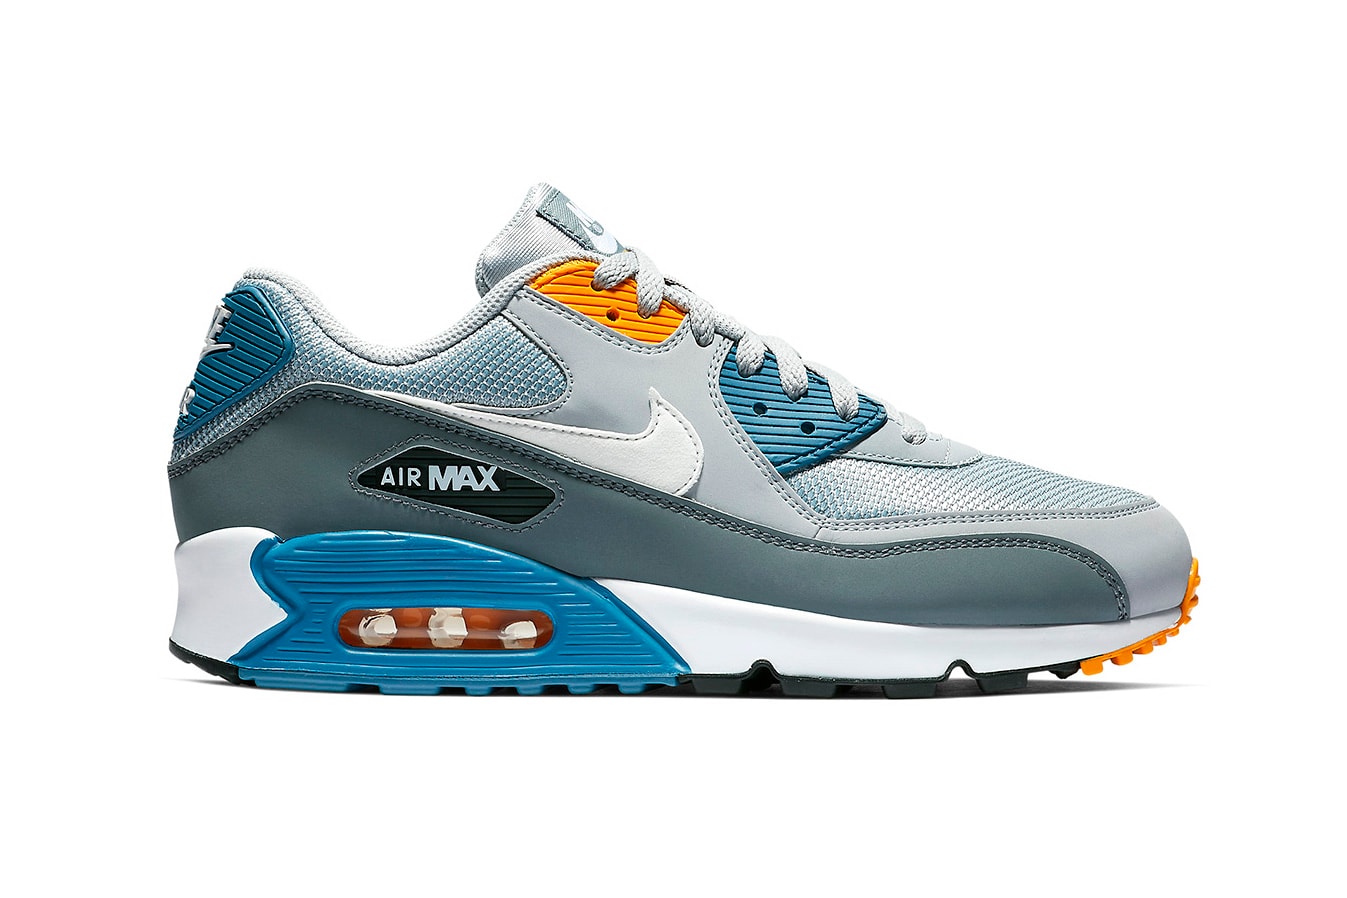 Nike Air Max 90 "Wolf Grey/Indigo Storm" Release Date january 2019 